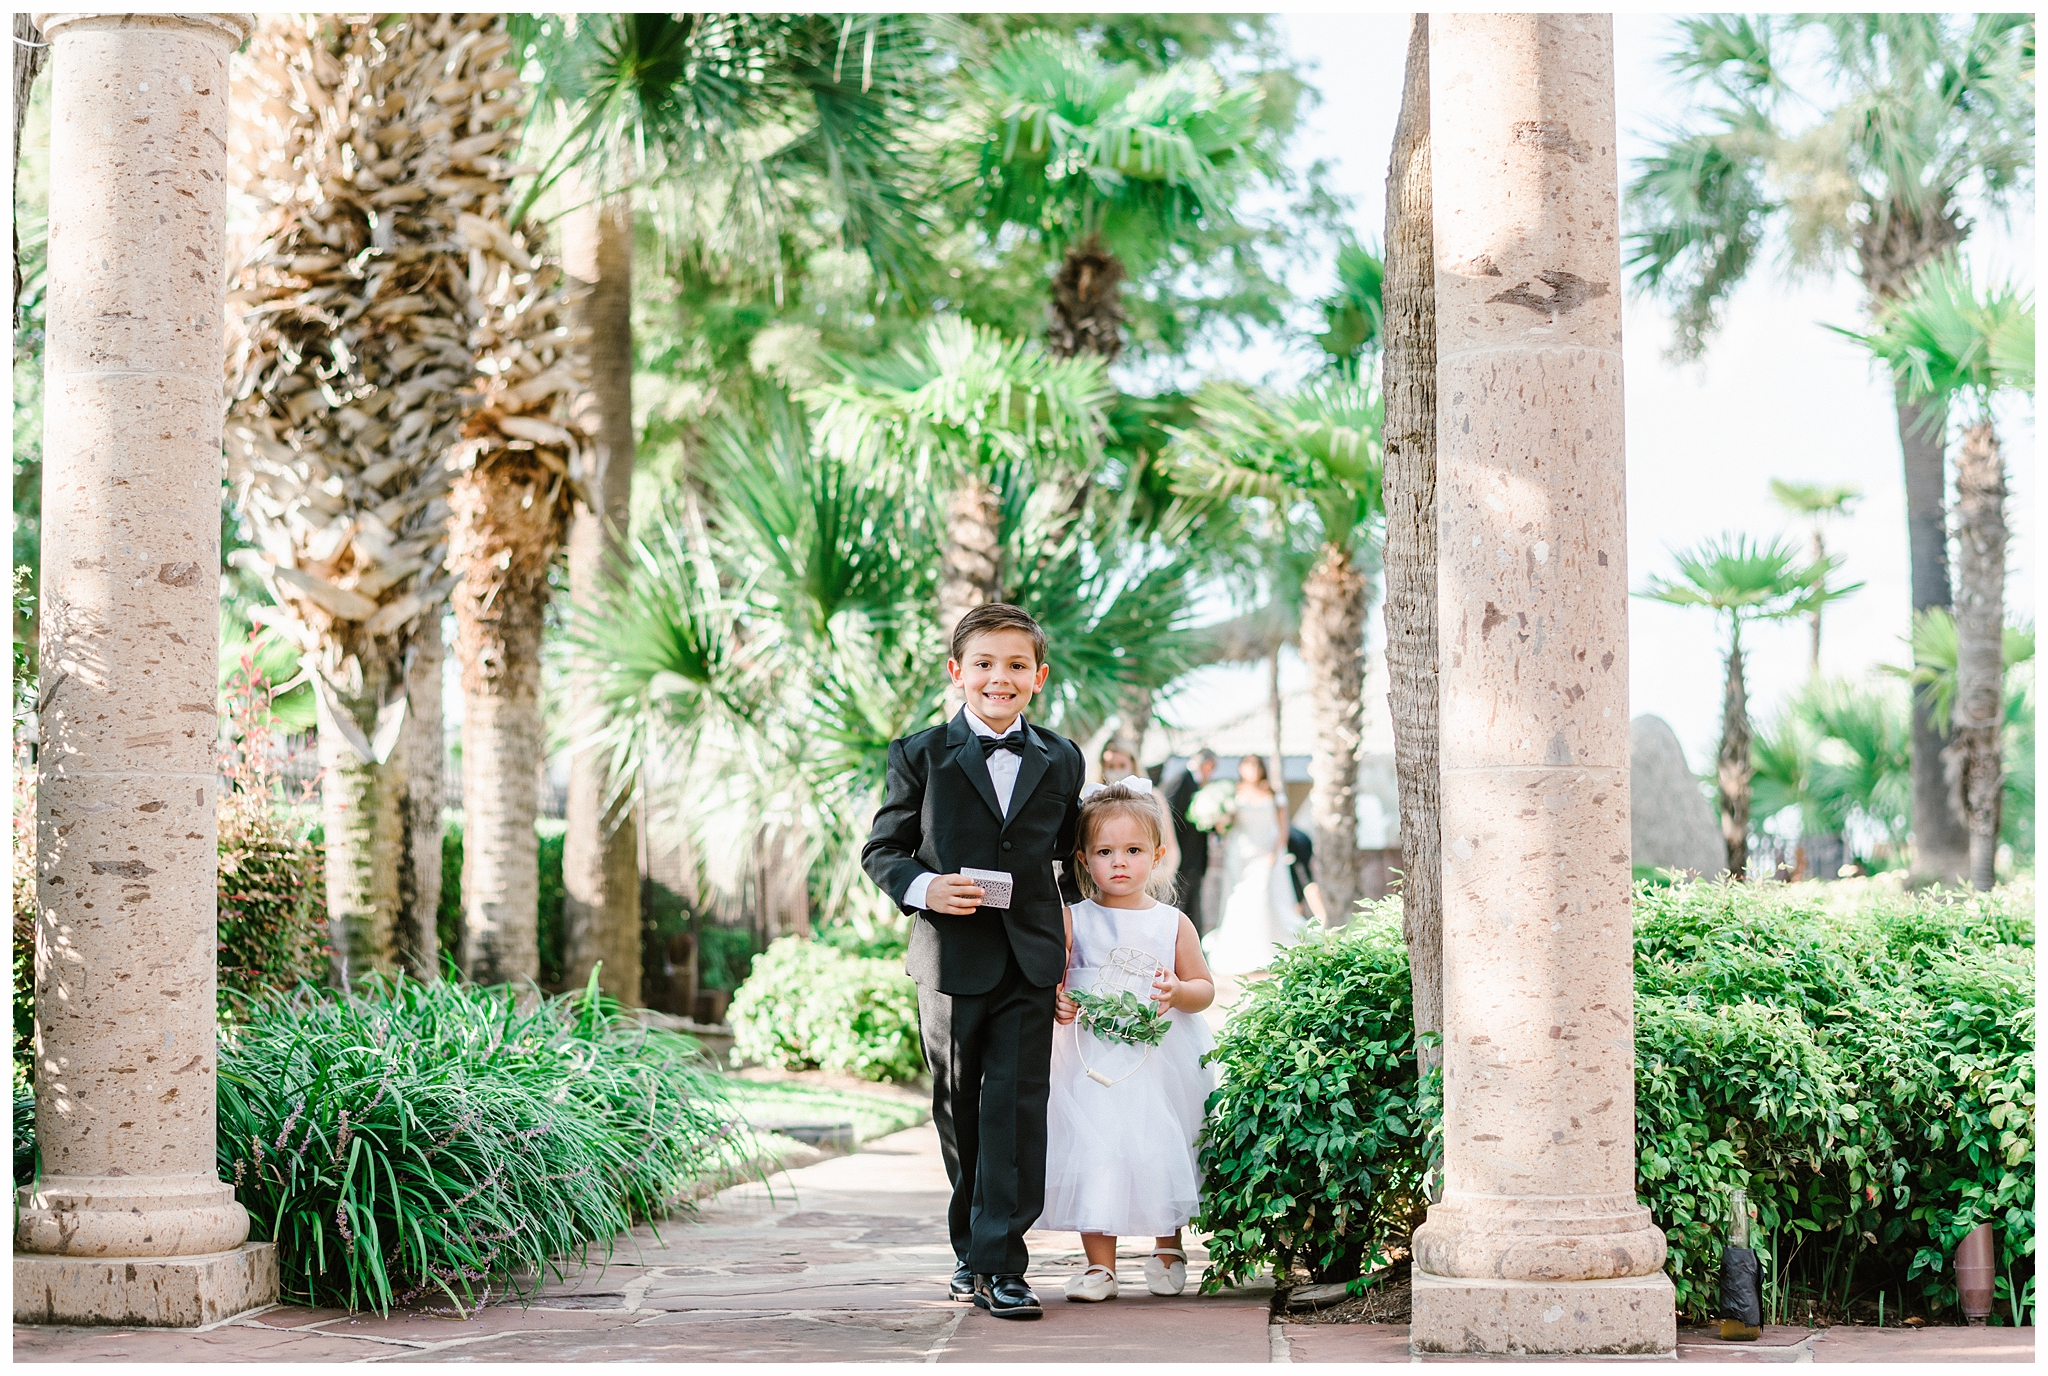 Ring Bearer and Flower Girl are the Cutest Things Ever